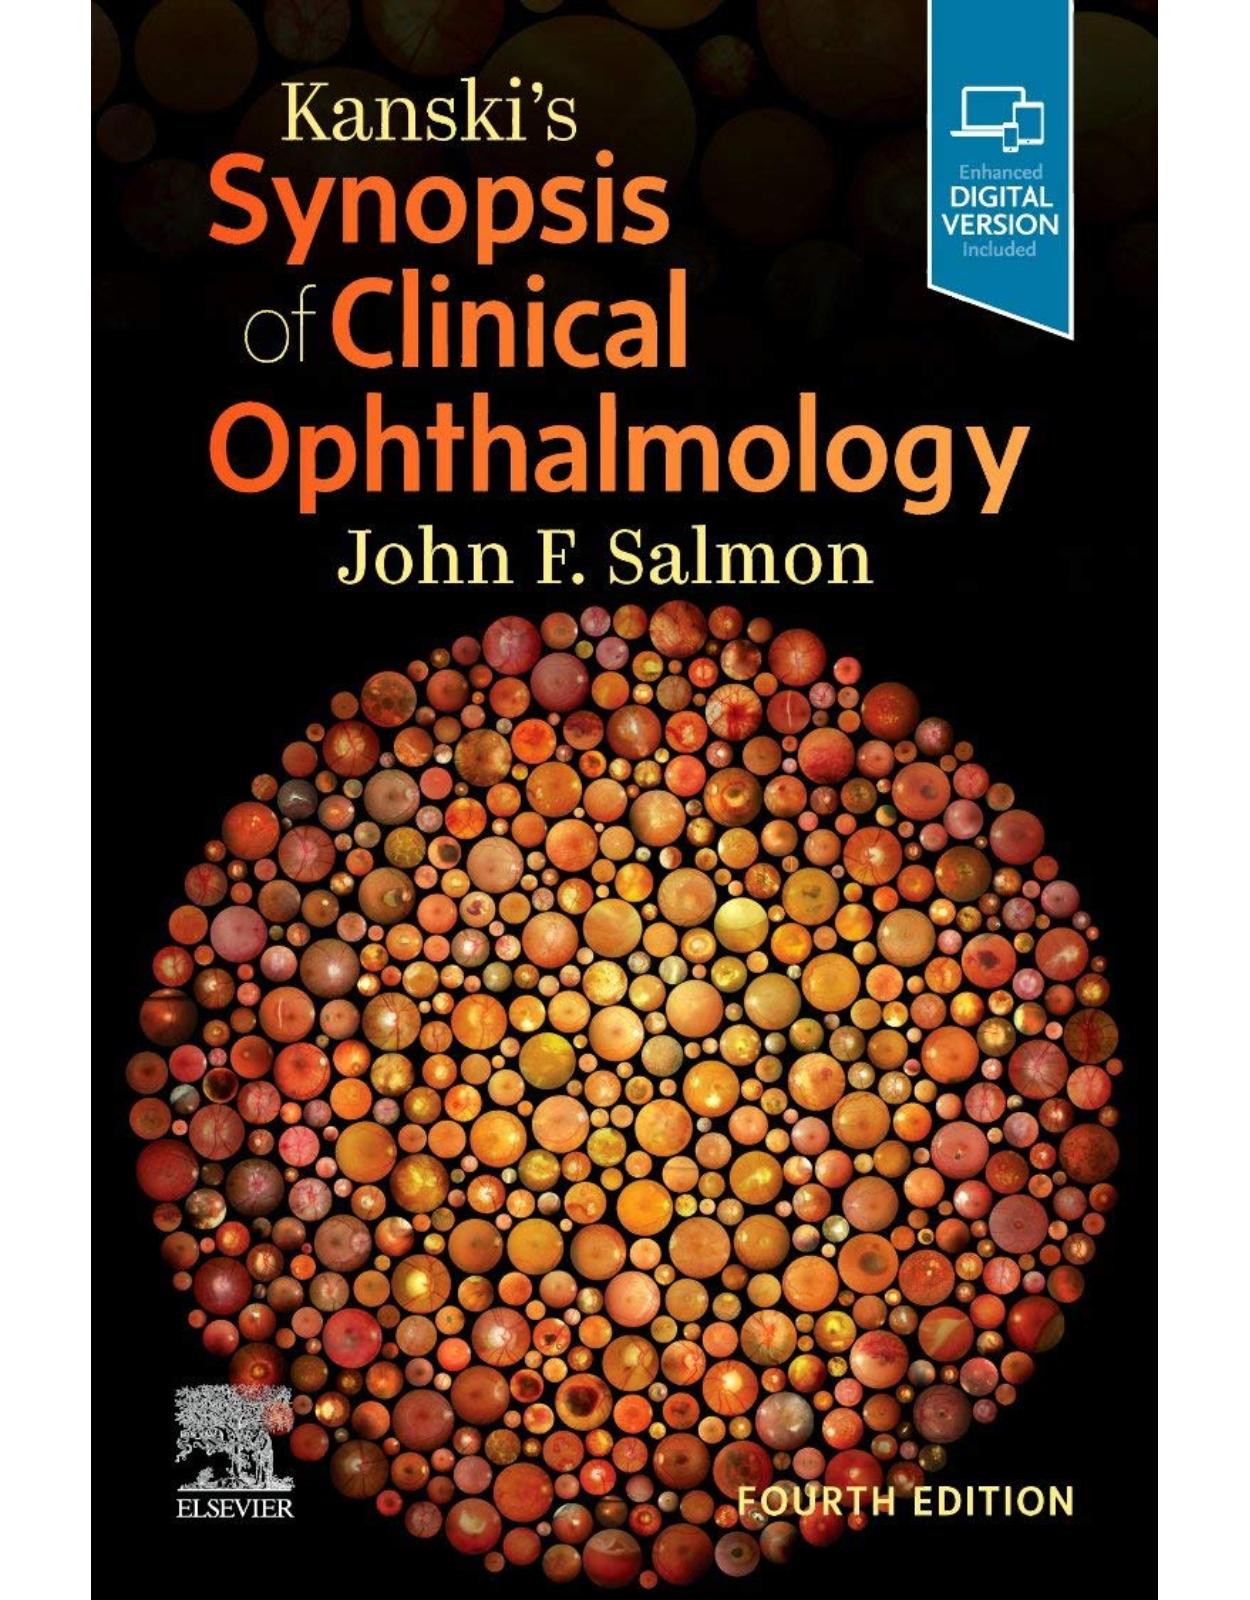 Kanski's Synopsis of Clinical Ophthalmology 